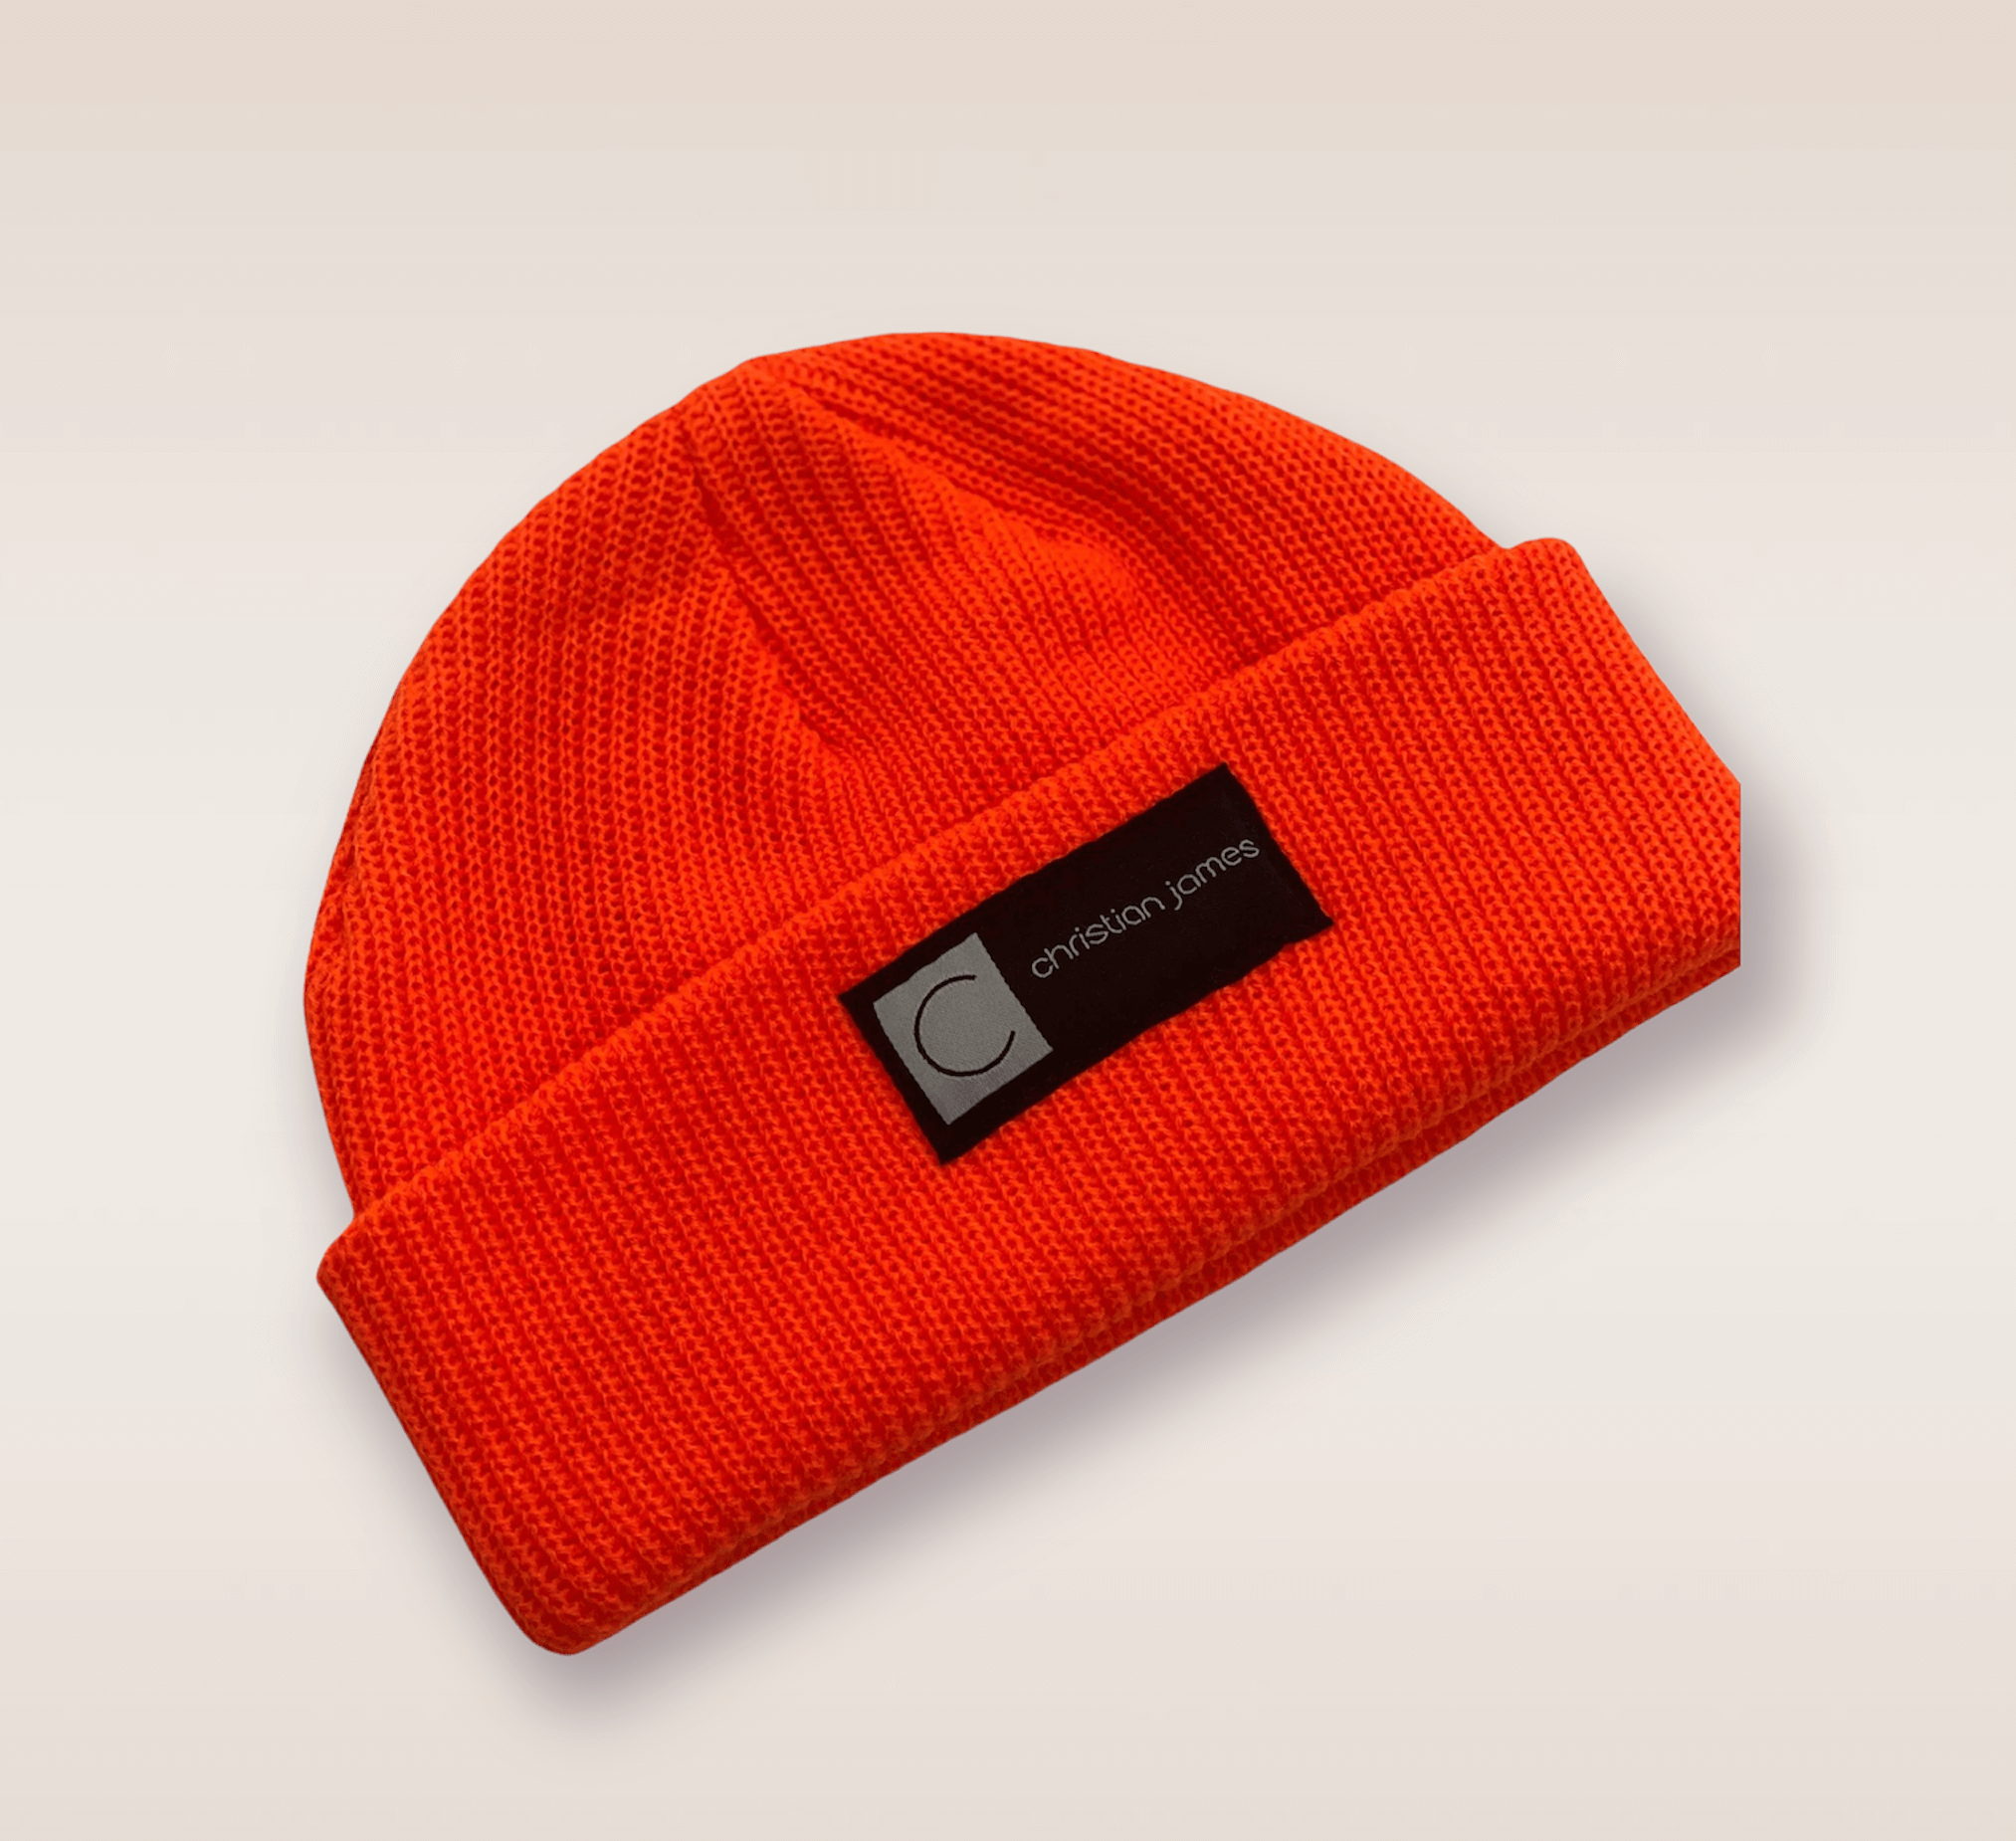 In this up-close shot, we are introduced to the Red CJ beanie. A red knit hat featuring an embroidered patch of the brand's acronym in black and white. 